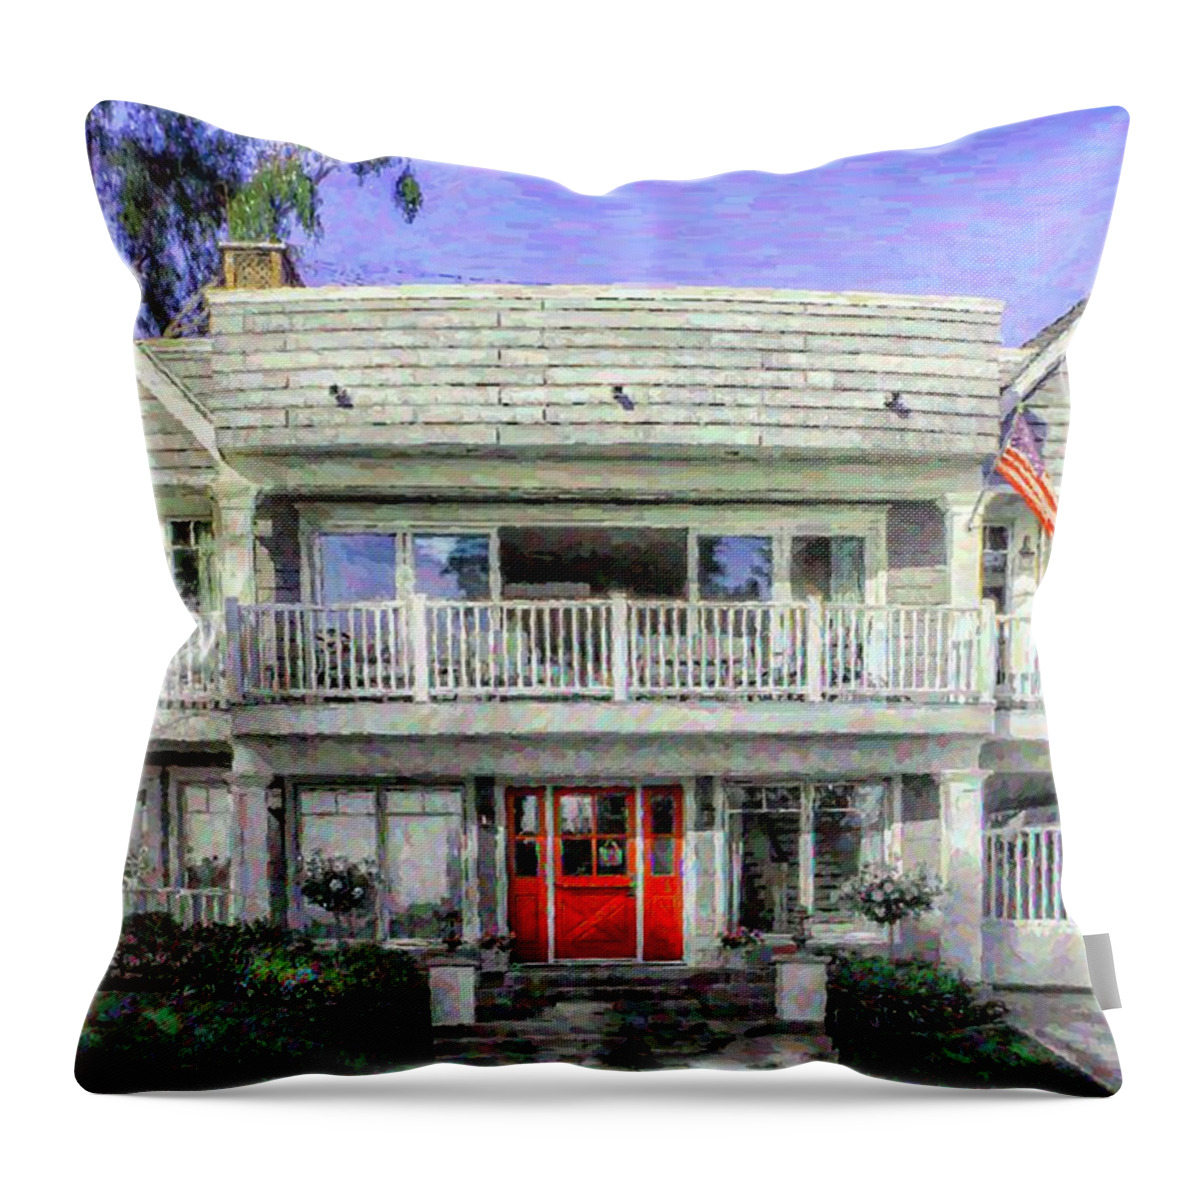 Beach House Throw Pillow featuring the photograph Pretty House by the Beach by Alison Frank